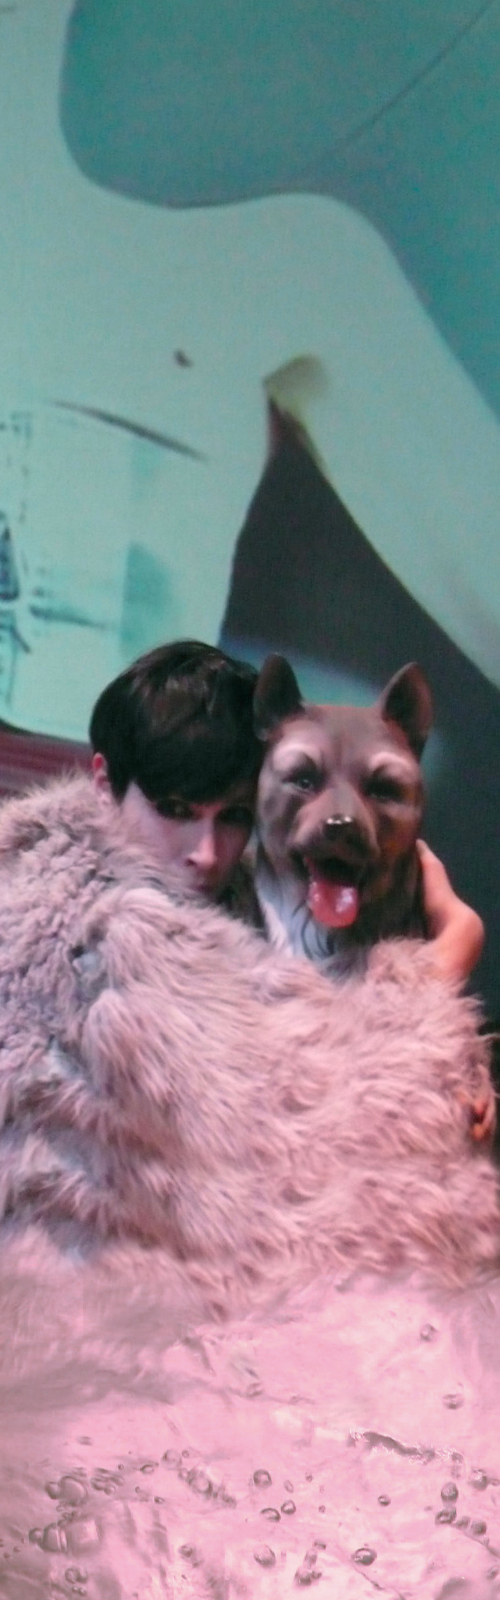 In the foreground a young woman wears a fur coat and hugs a statue of a dog, behind the video projection of the same young woman forced into a bodice that squeezes her chest so tightly until her breasts come out